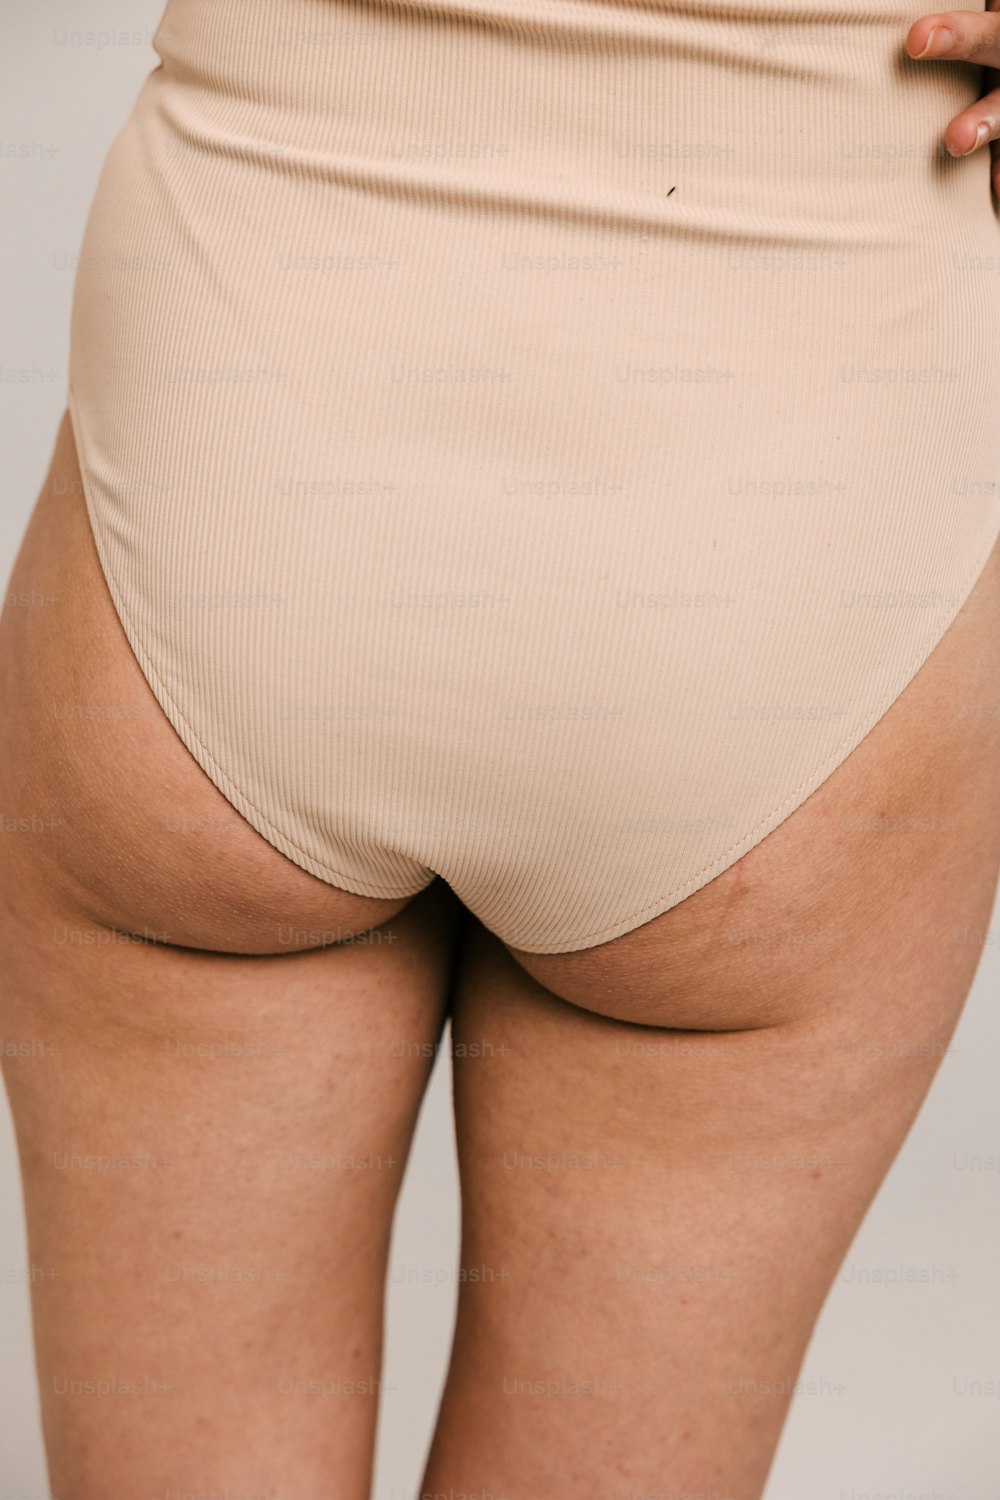 a woman in a tan panties showing her butt